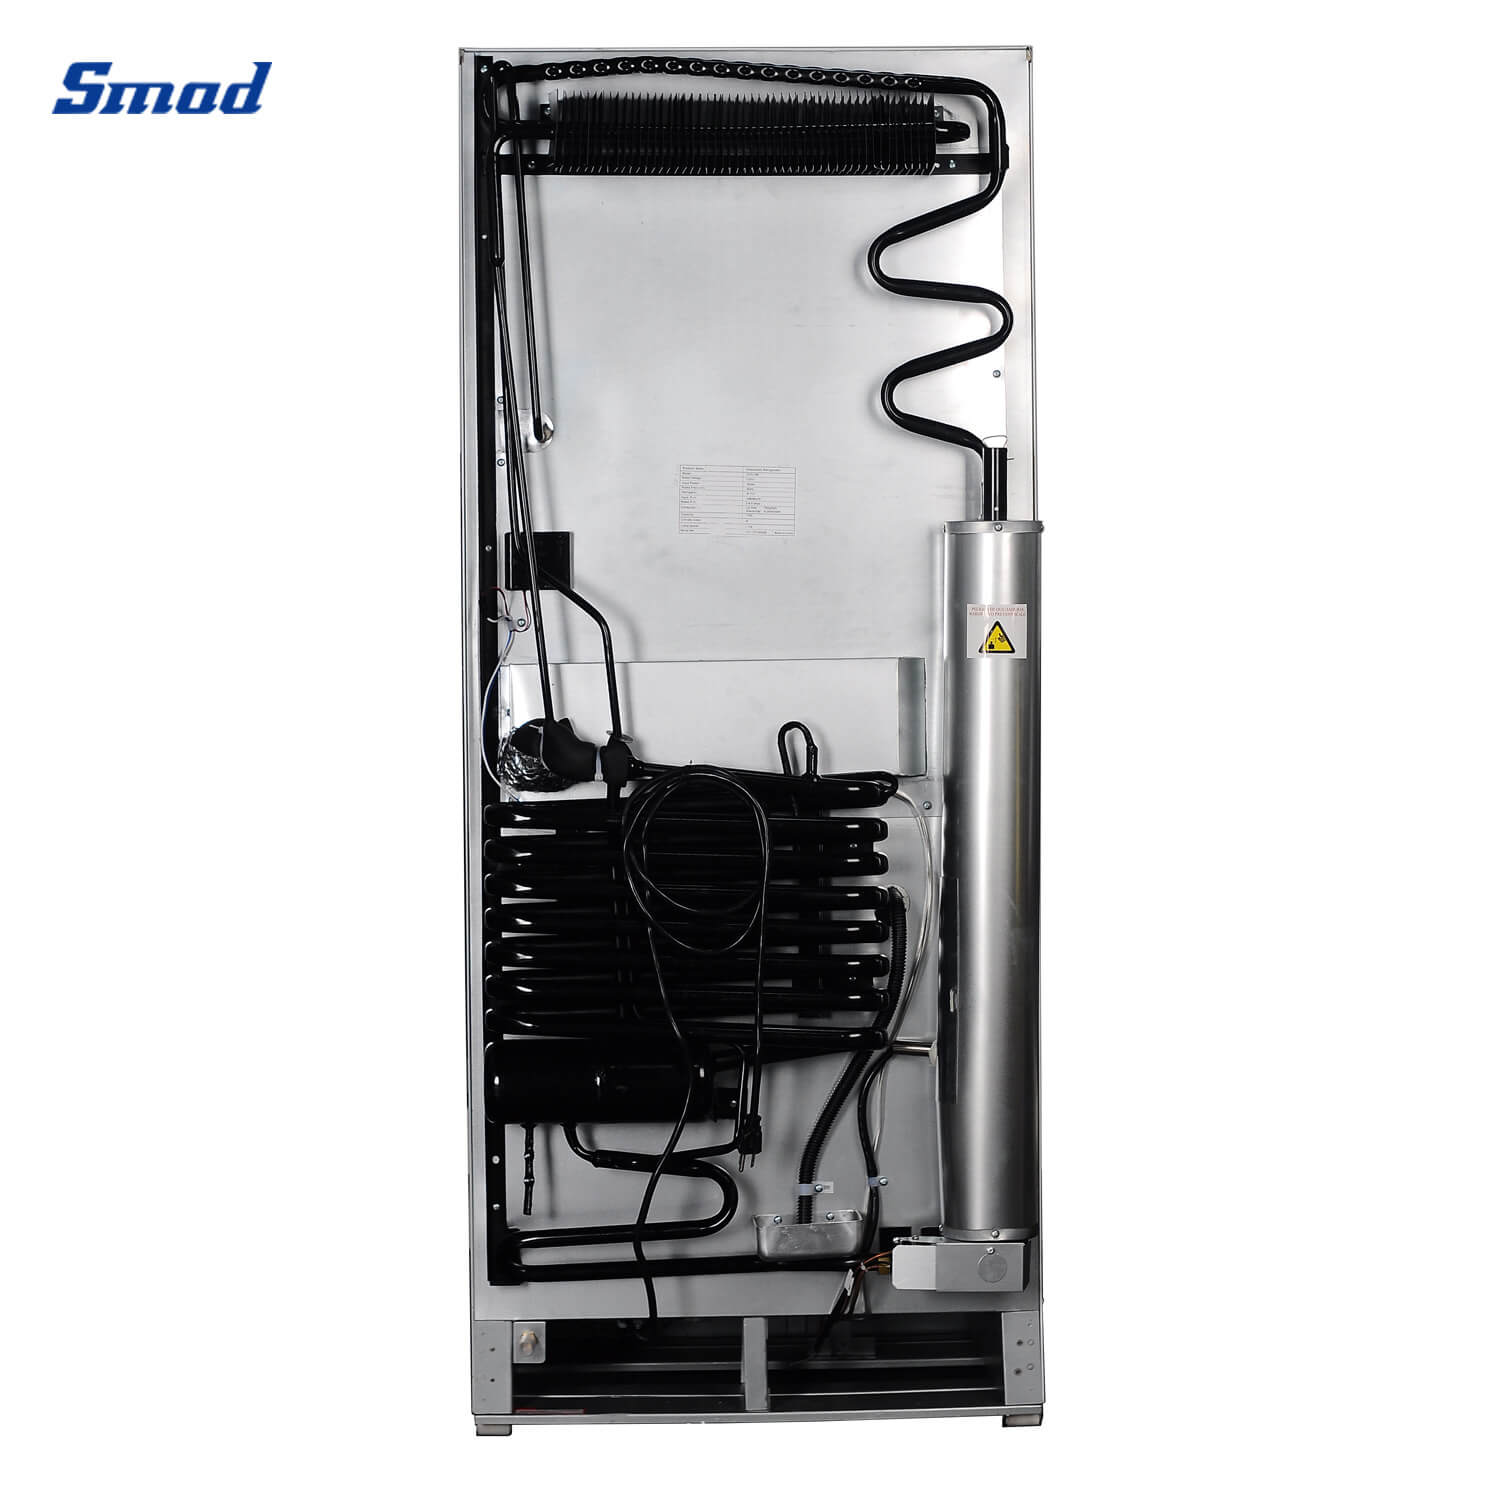 
Smad 9.4 Cu. Ft. Double Door Gas/Electric Fridge with applicable for off-grid areas
